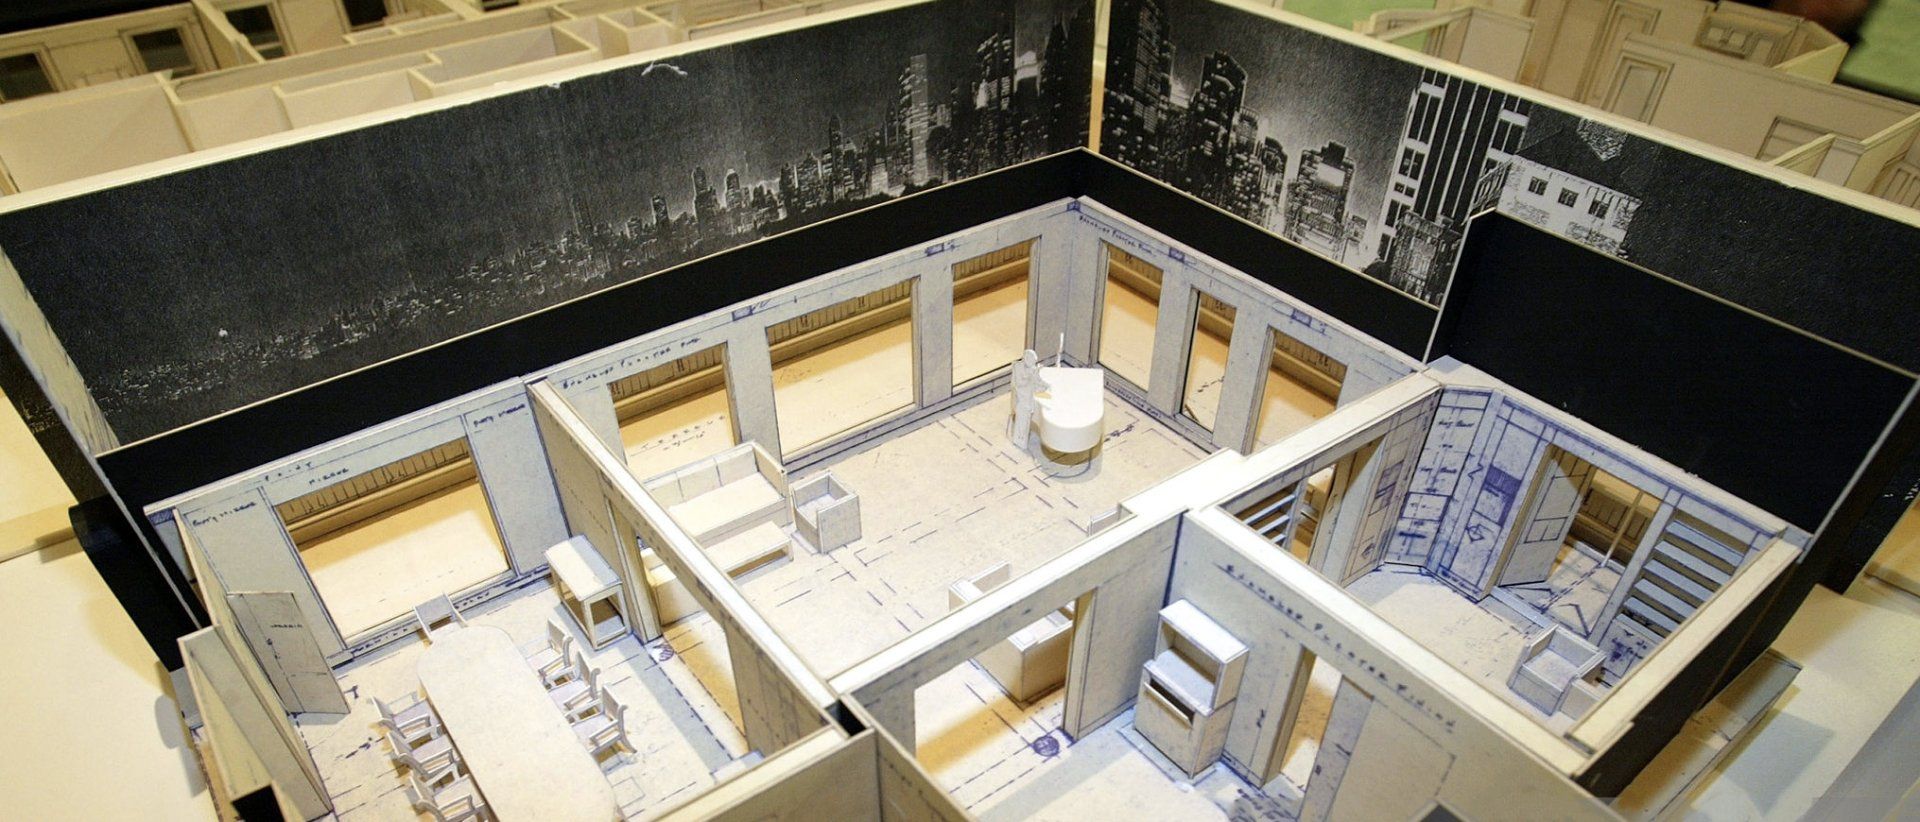 A model of the New York apartment, which was built on location in Beaufort, SC.